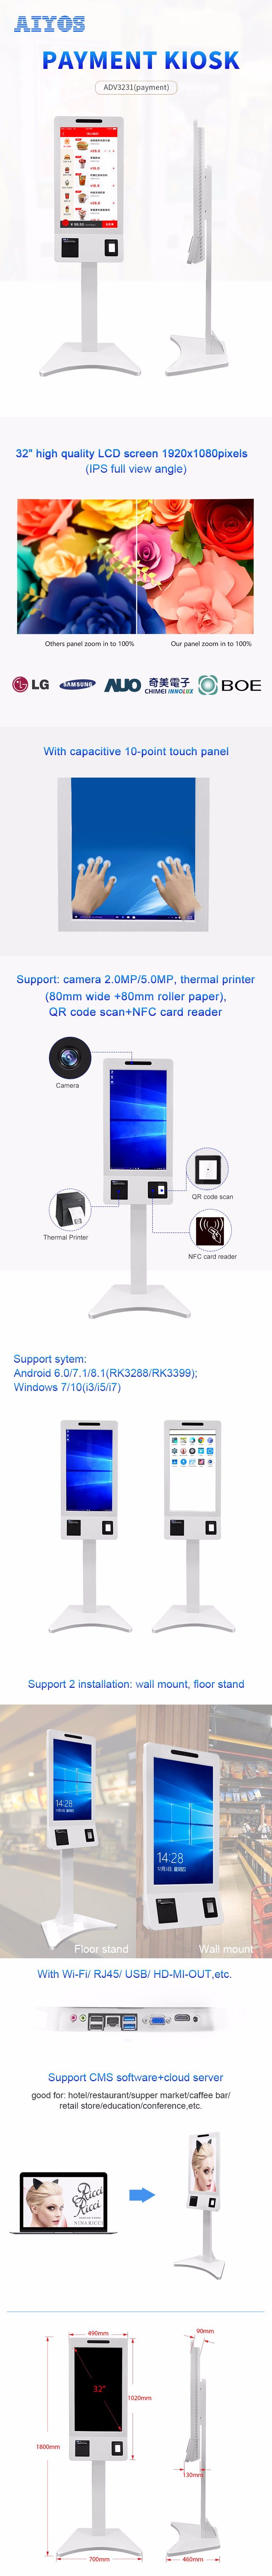 Touch Screen Monitor Payment Information, Self-Service Ticket Vending Machine, Bank Bill Payment Kiosk, Restaurant Ordering Kiosk